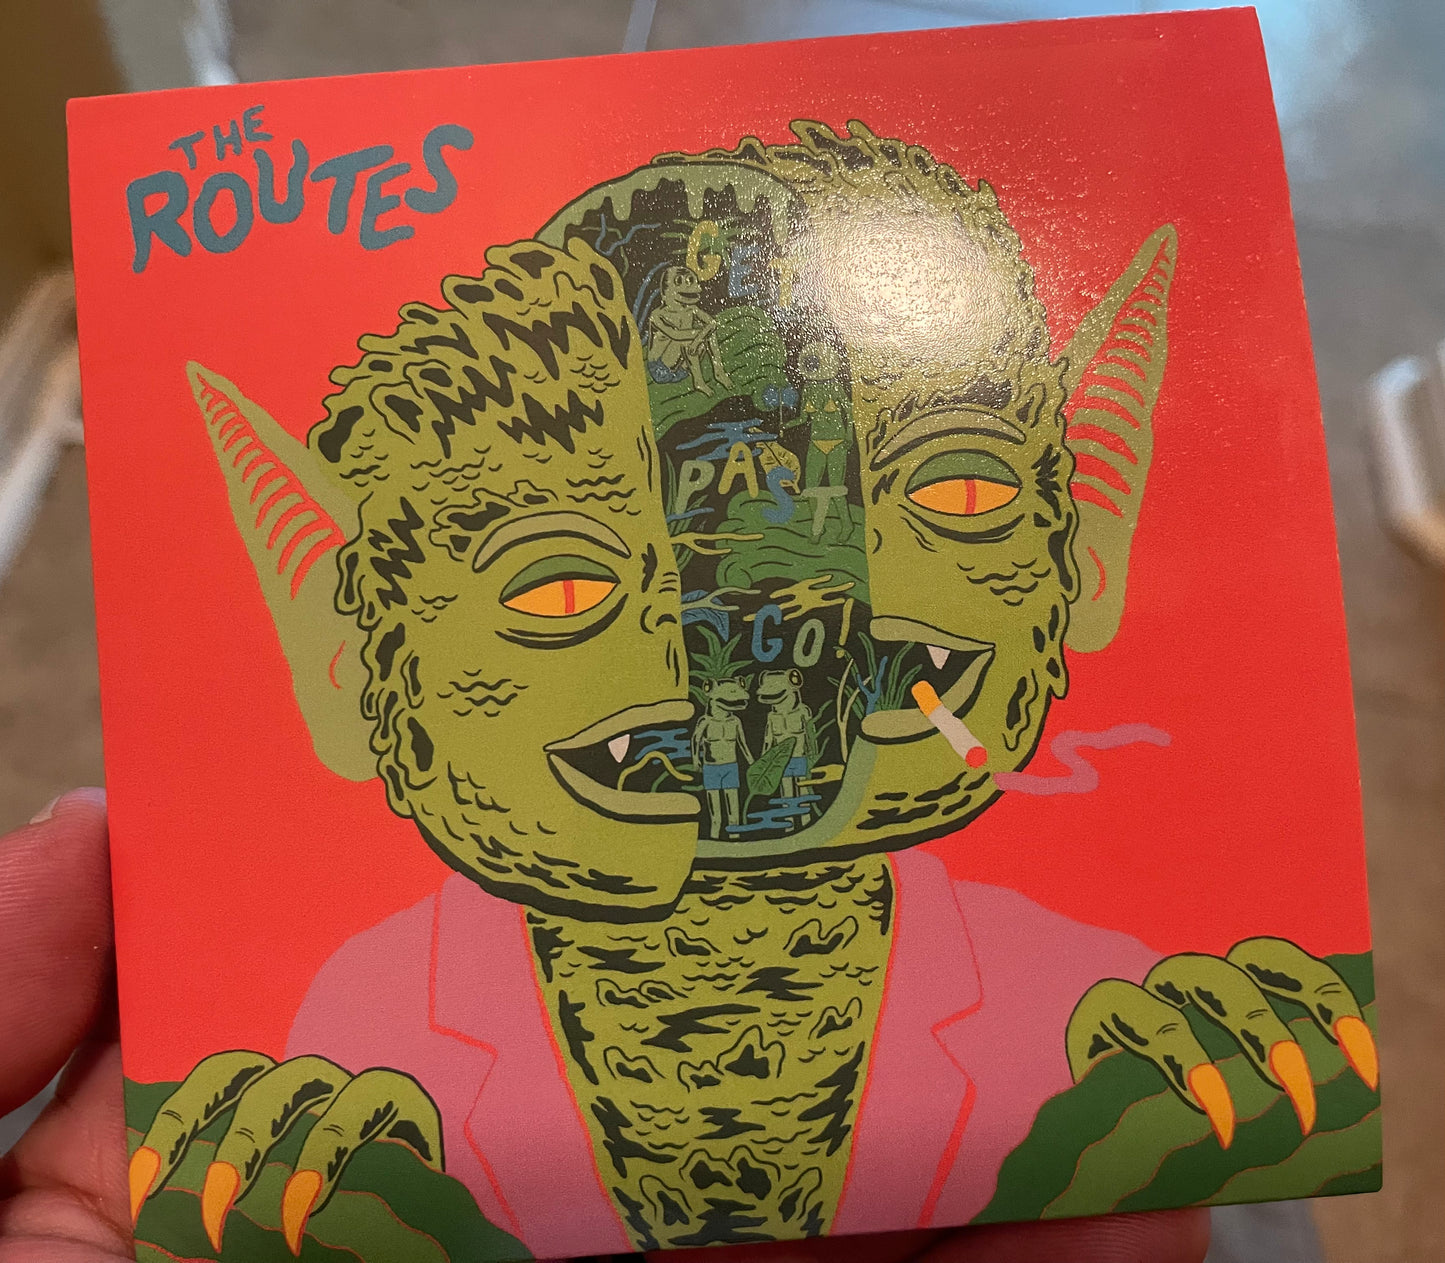 OMR-069 The Routes “Get Past Go!” LP (Colored Vinyl/CD)